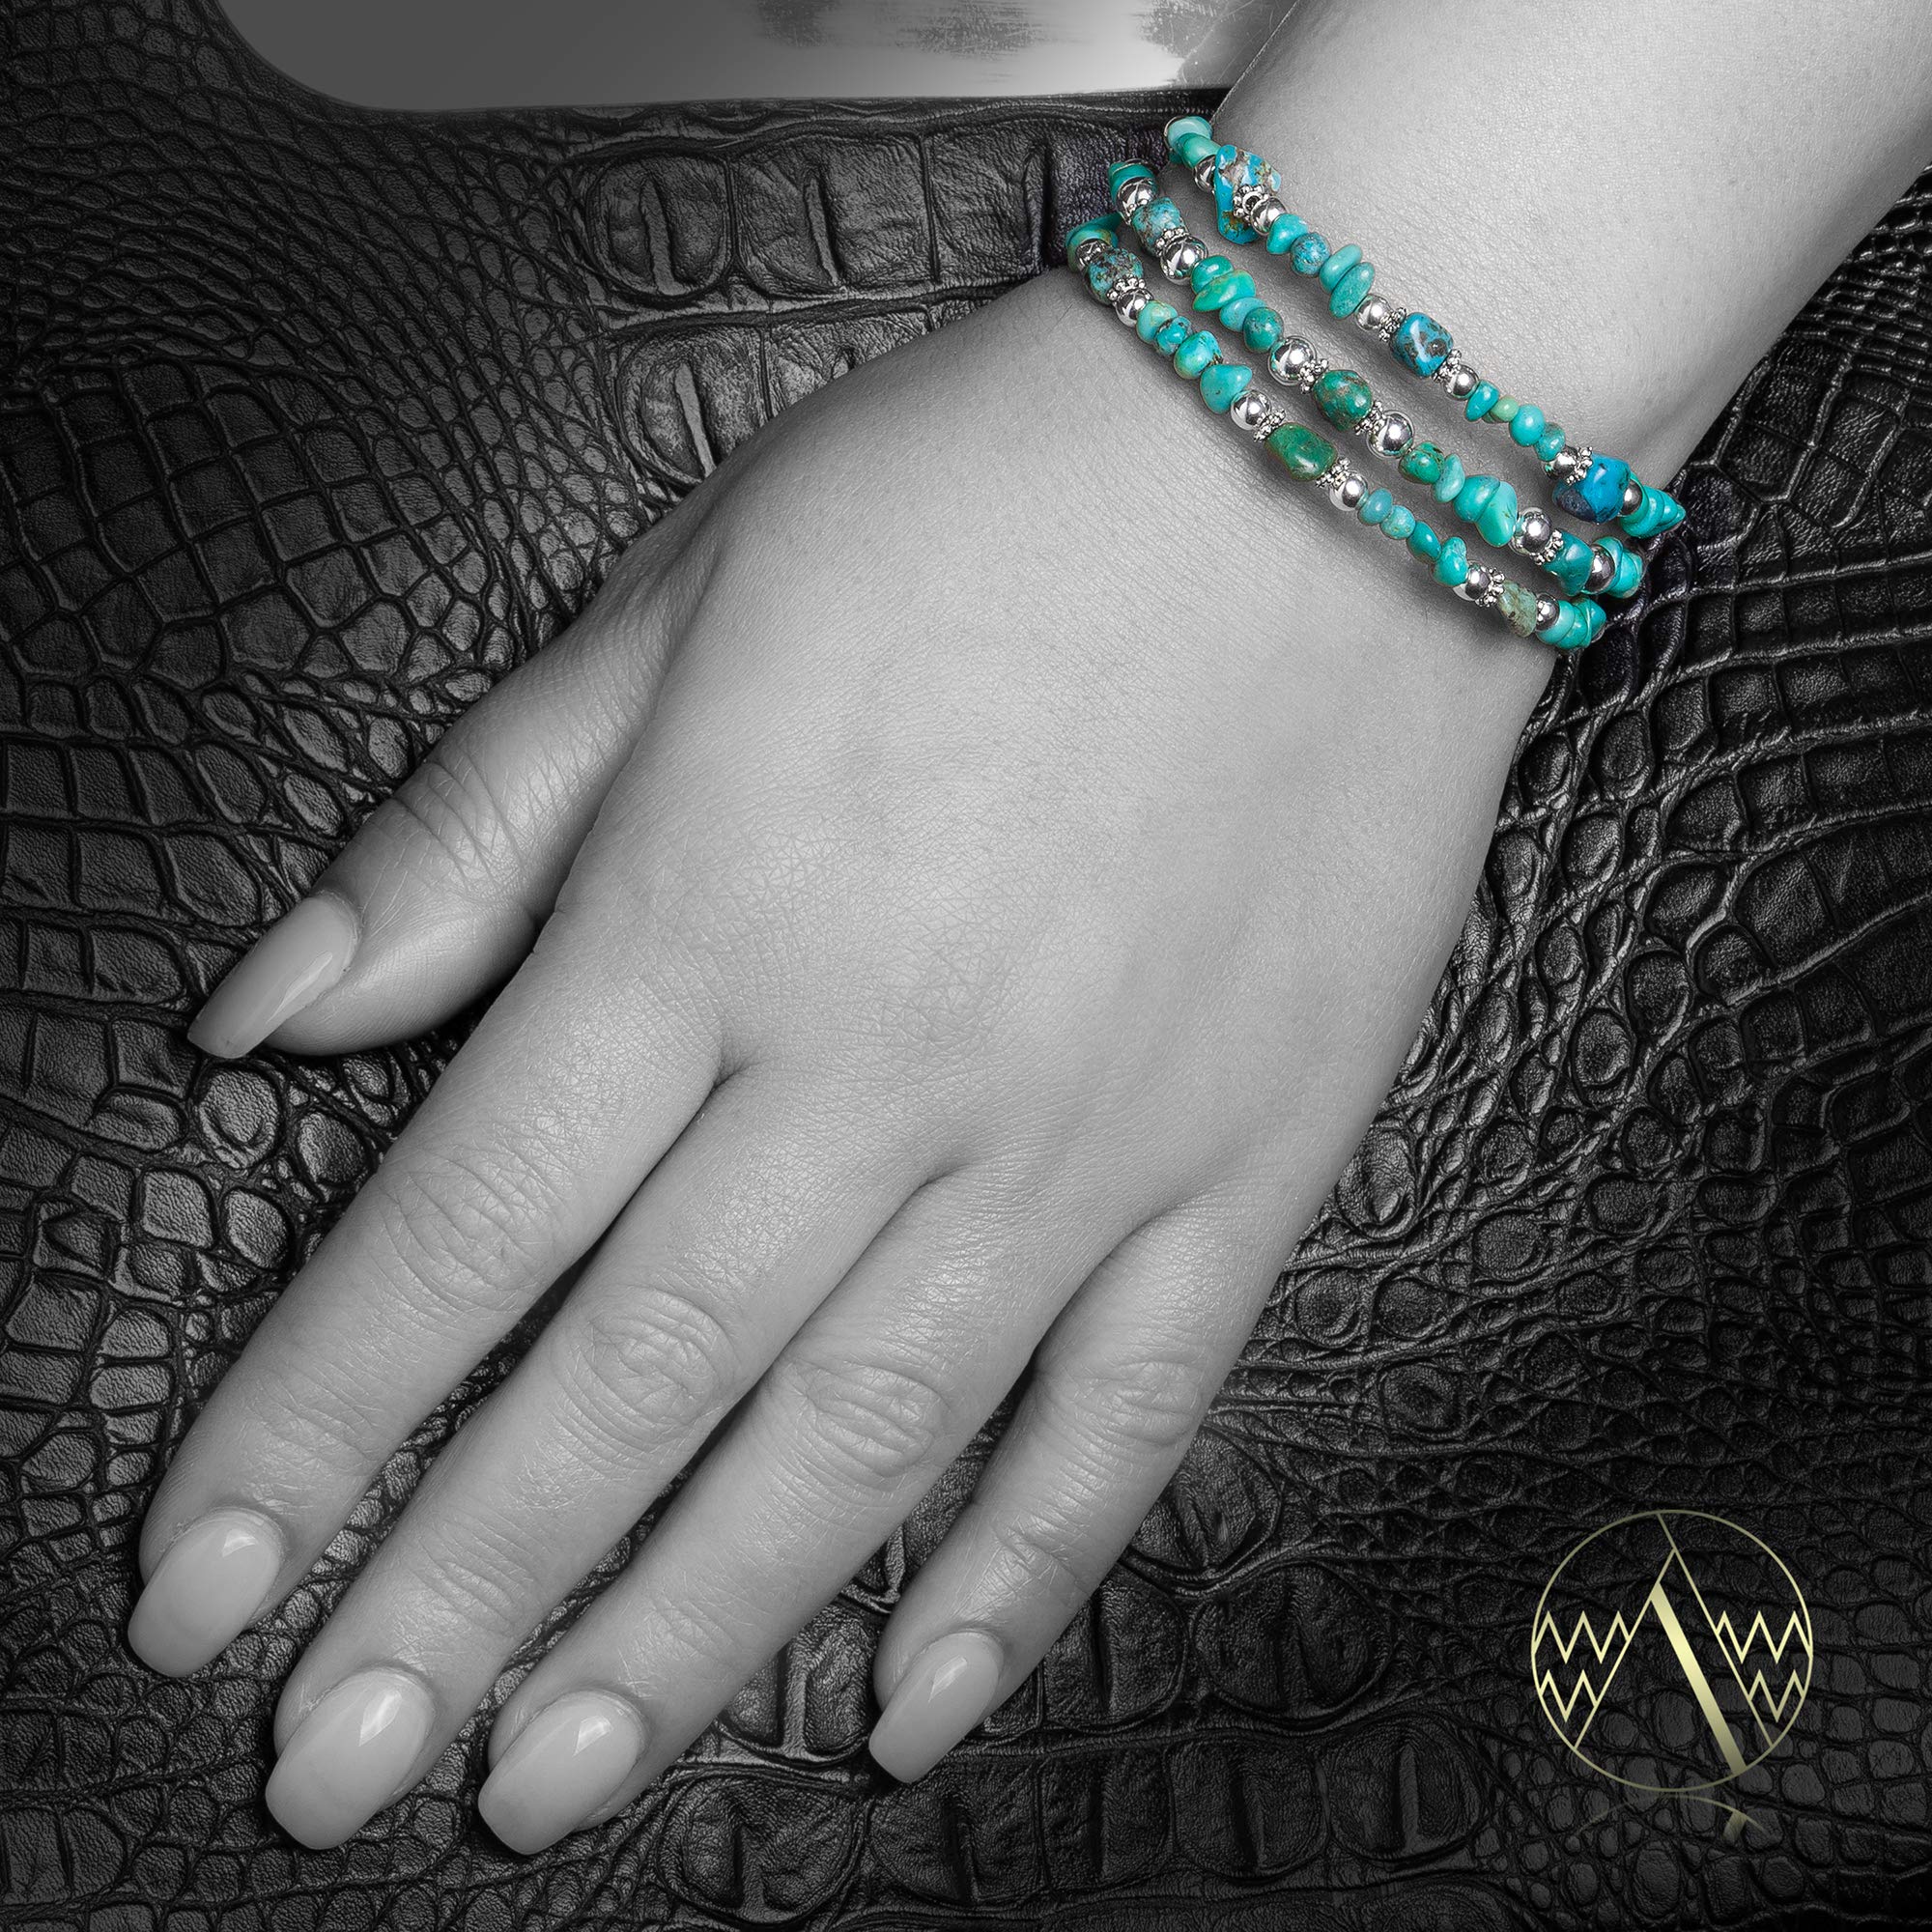 $80Tag Certified Navajo Native Natural Turquoise Adjustable Wrap Bracelet 12732-14 Made By Loma Siiva